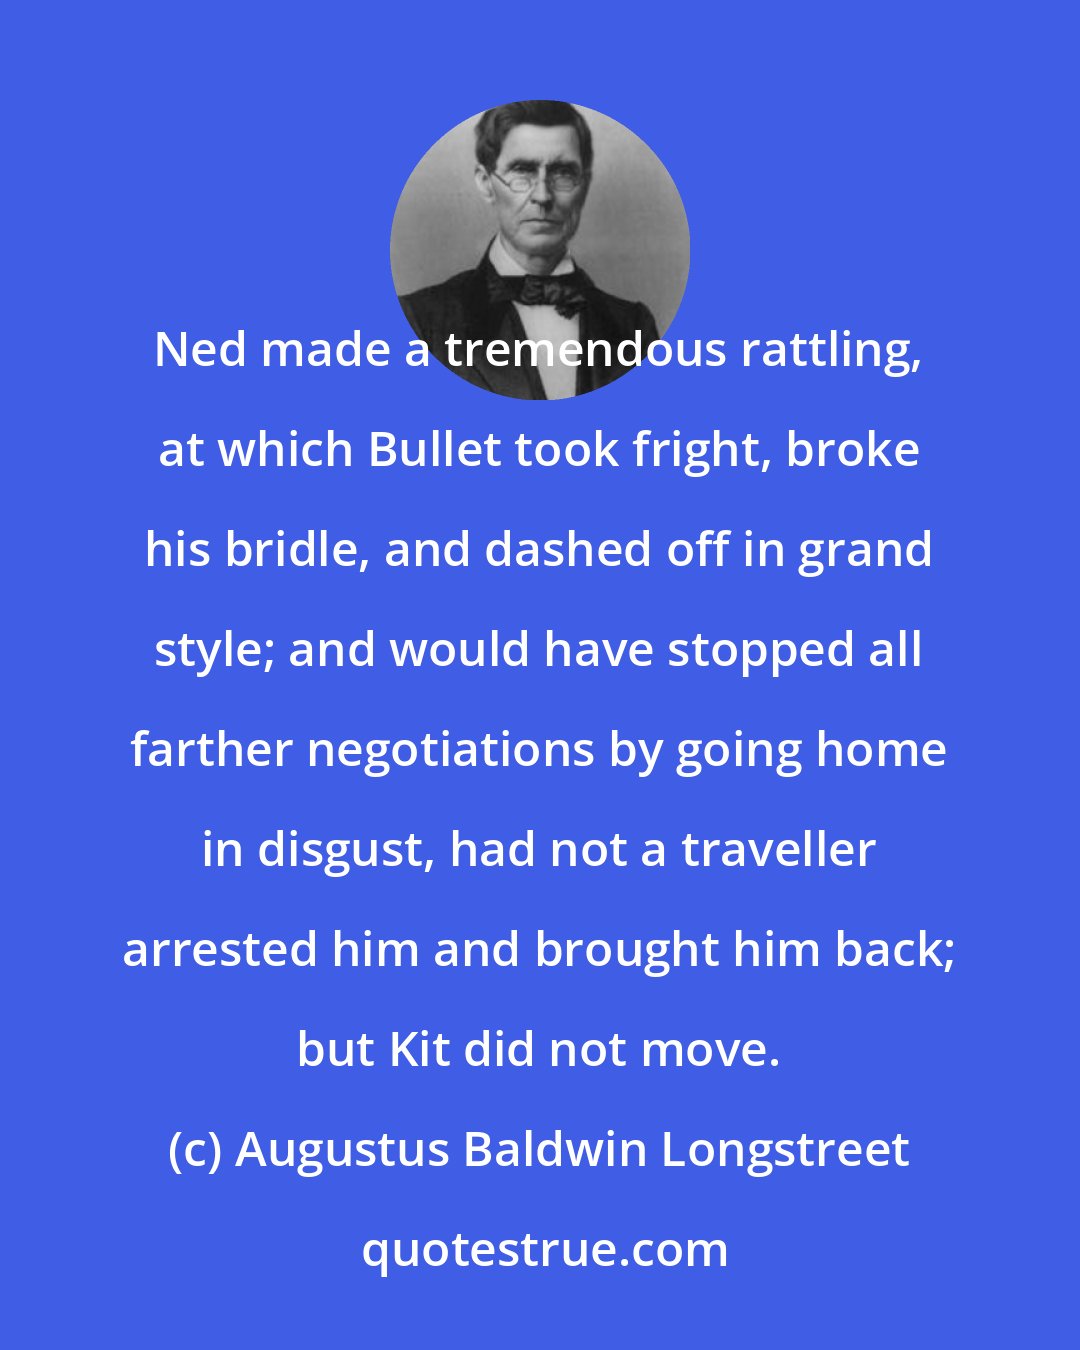 Augustus Baldwin Longstreet: Ned made a tremendous rattling, at which Bullet took fright, broke his bridle, and dashed off in grand style; and would have stopped all farther negotiations by going home in disgust, had not a traveller arrested him and brought him back; but Kit did not move.